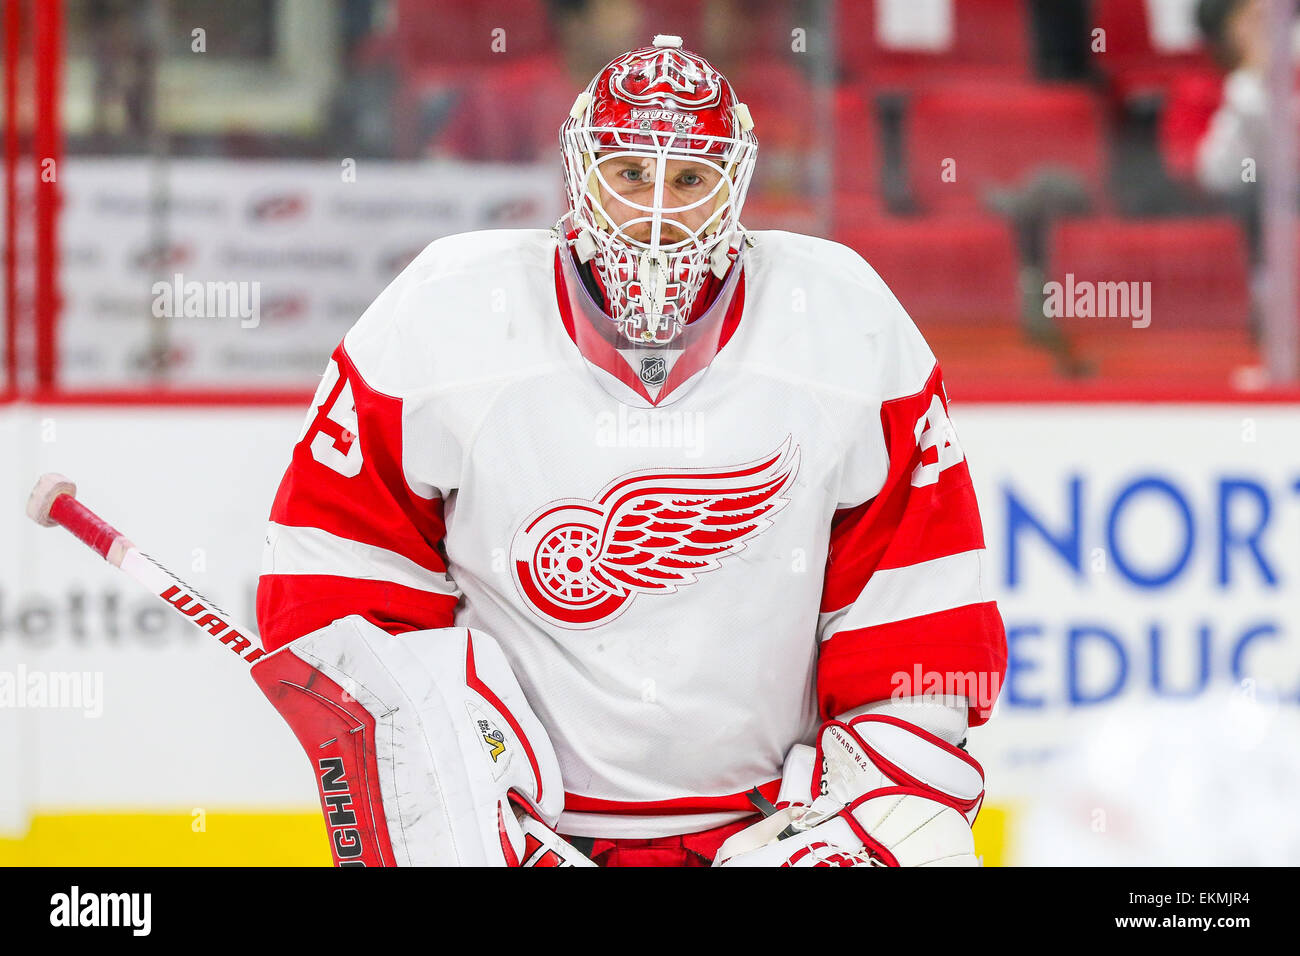 Detroit Red Wings goalie Jimmy Howard (35) during the NHL game between the Detroit Red Wings and the Carolina Hurricanes at the PNC Arena. The Red Wings defeated the Carolina Hurricanes 2-0. Stock Photo